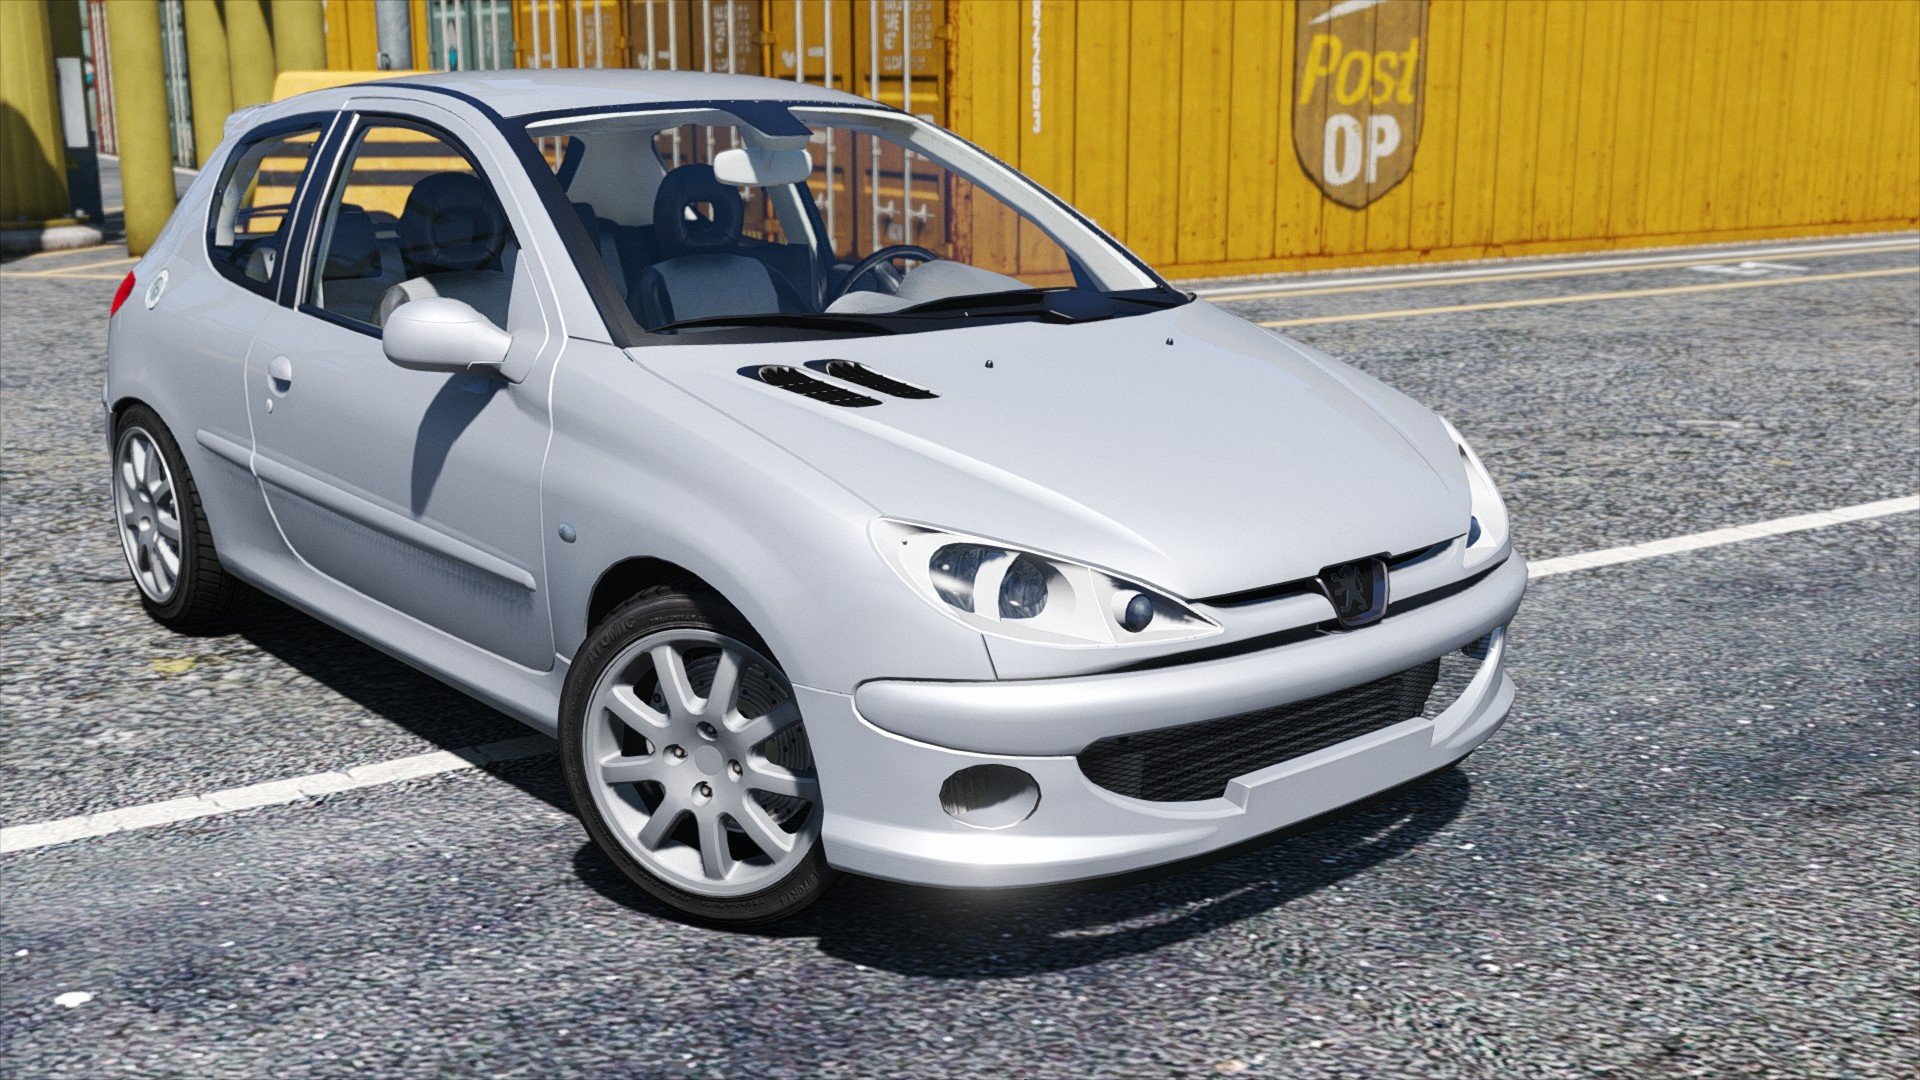 Nice wallpapers Peugeot 206 1920x1080px